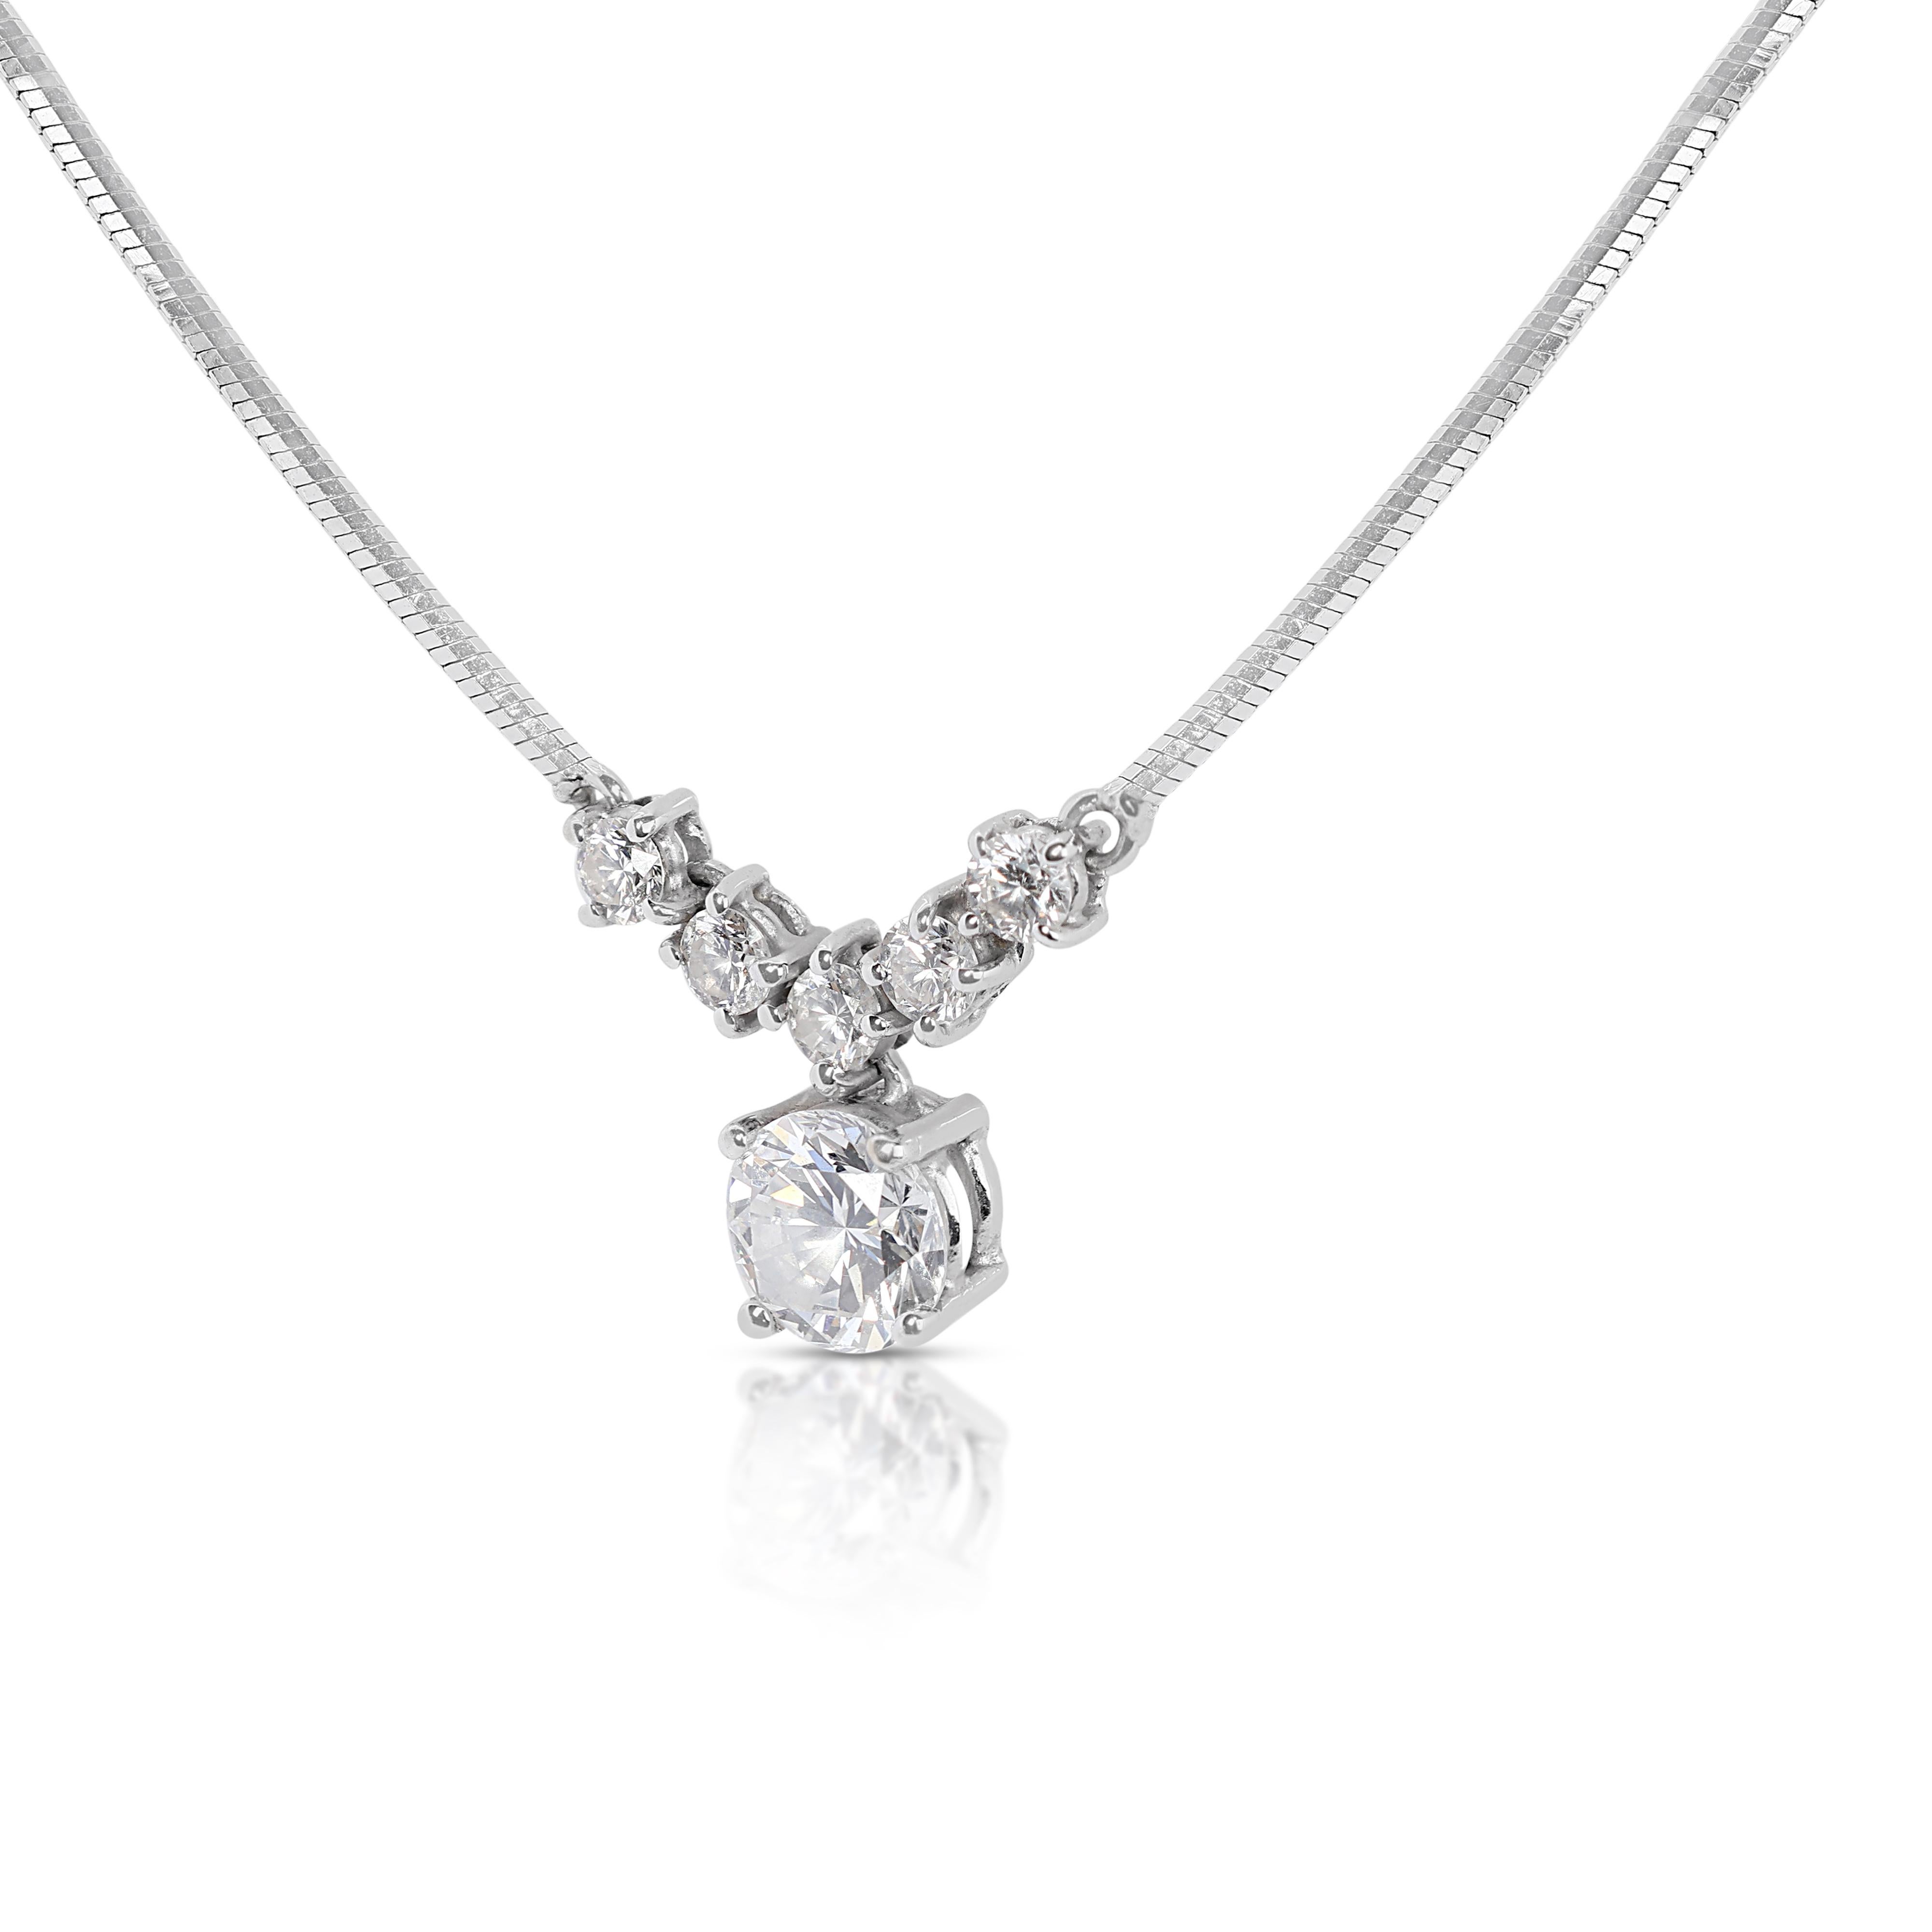 Luminous 0.50ct Diamonds Necklace in 18K White Gold In Excellent Condition For Sale In רמת גן, IL